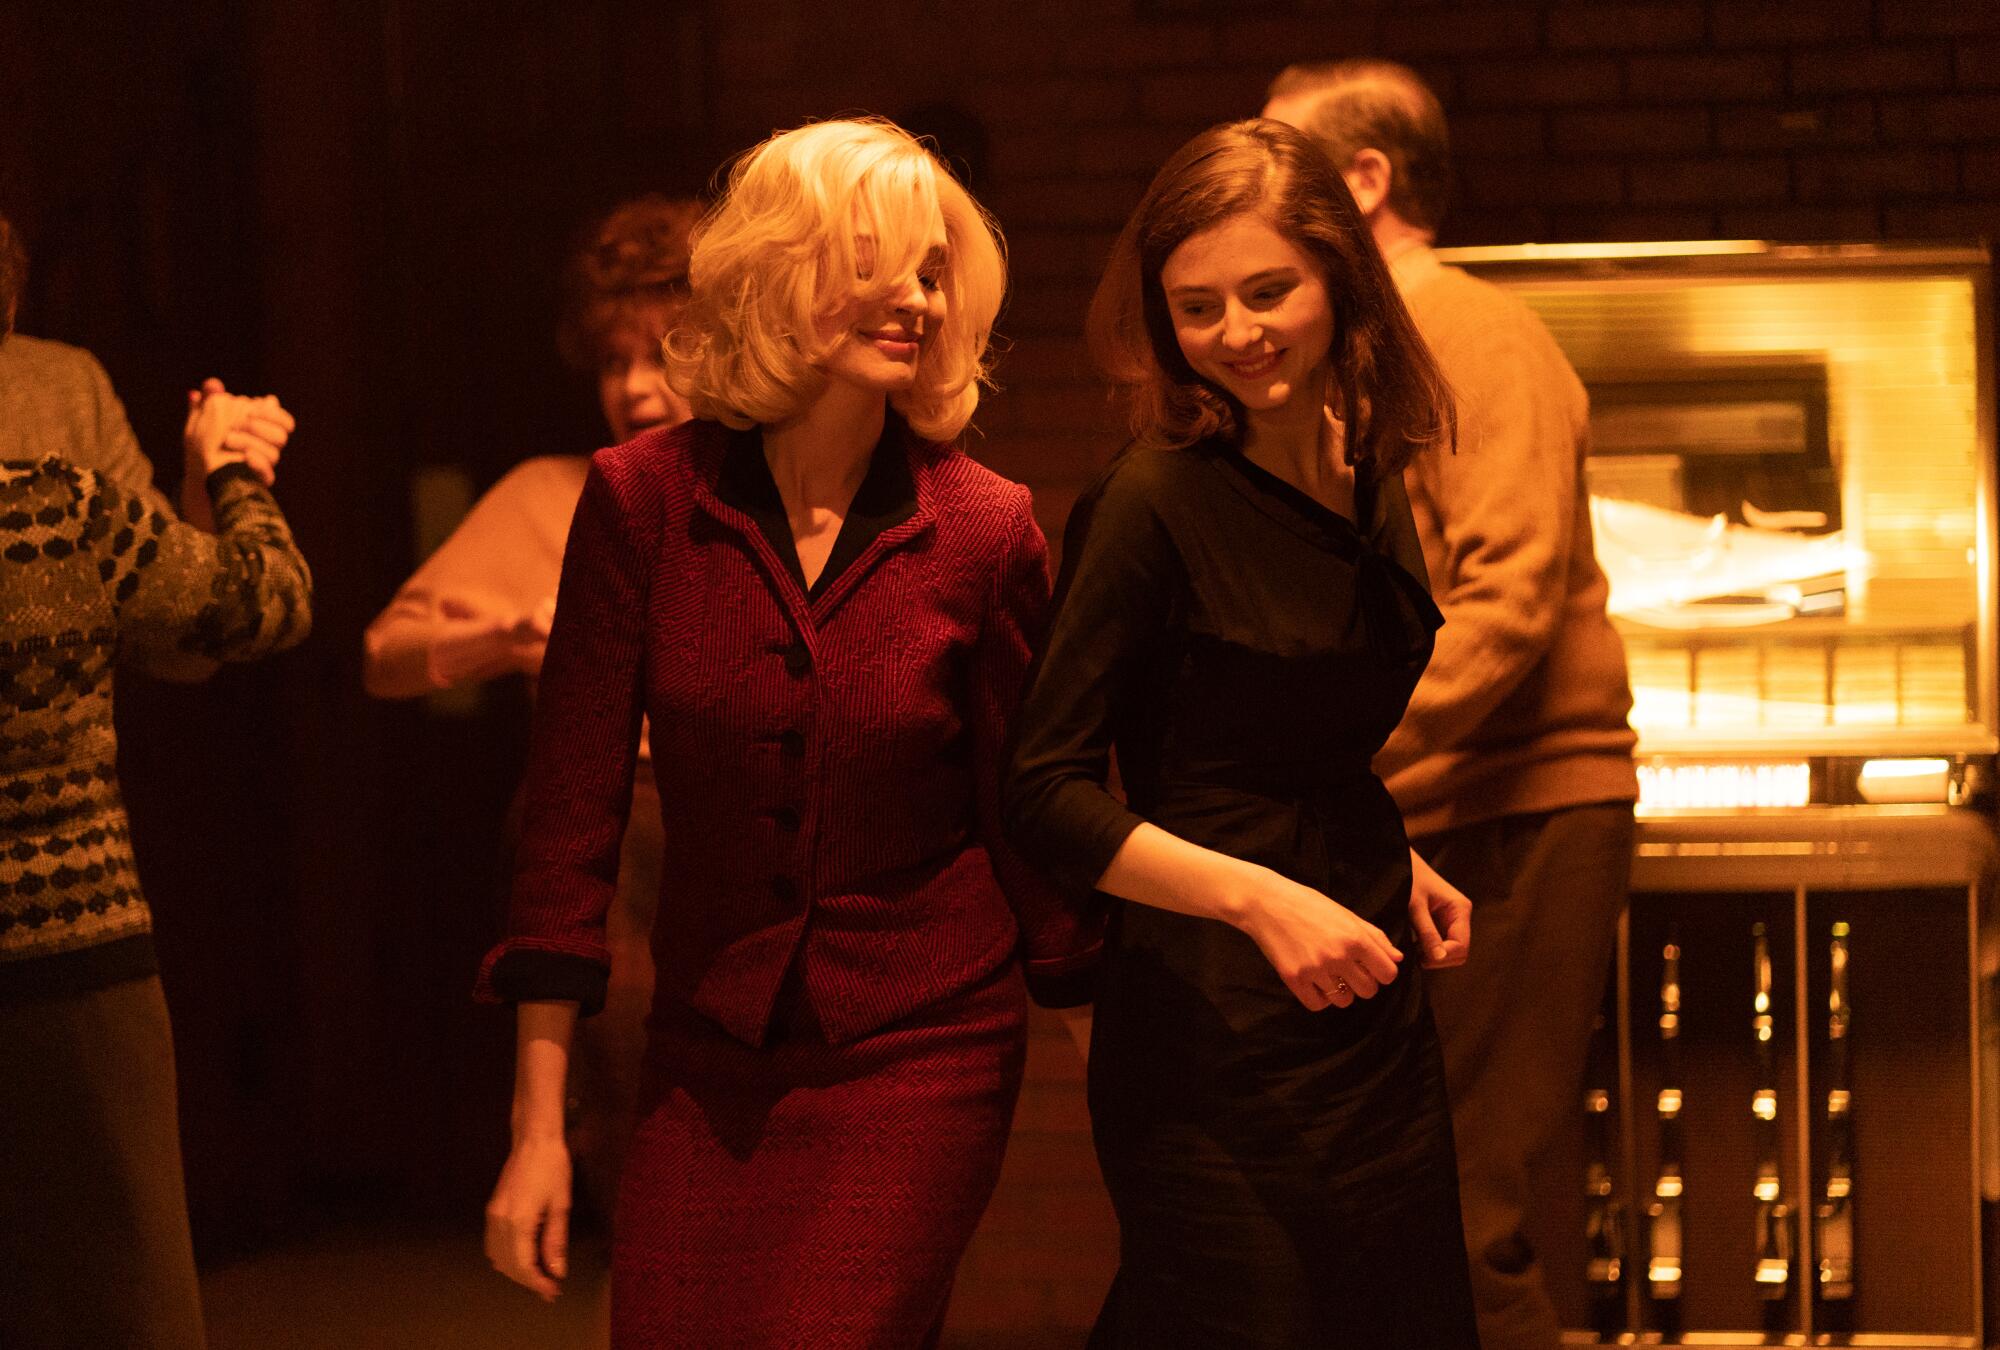 Anne Hathaway and Thomasin McKenzie as Rebecca and Eileen in the film "Eileen."